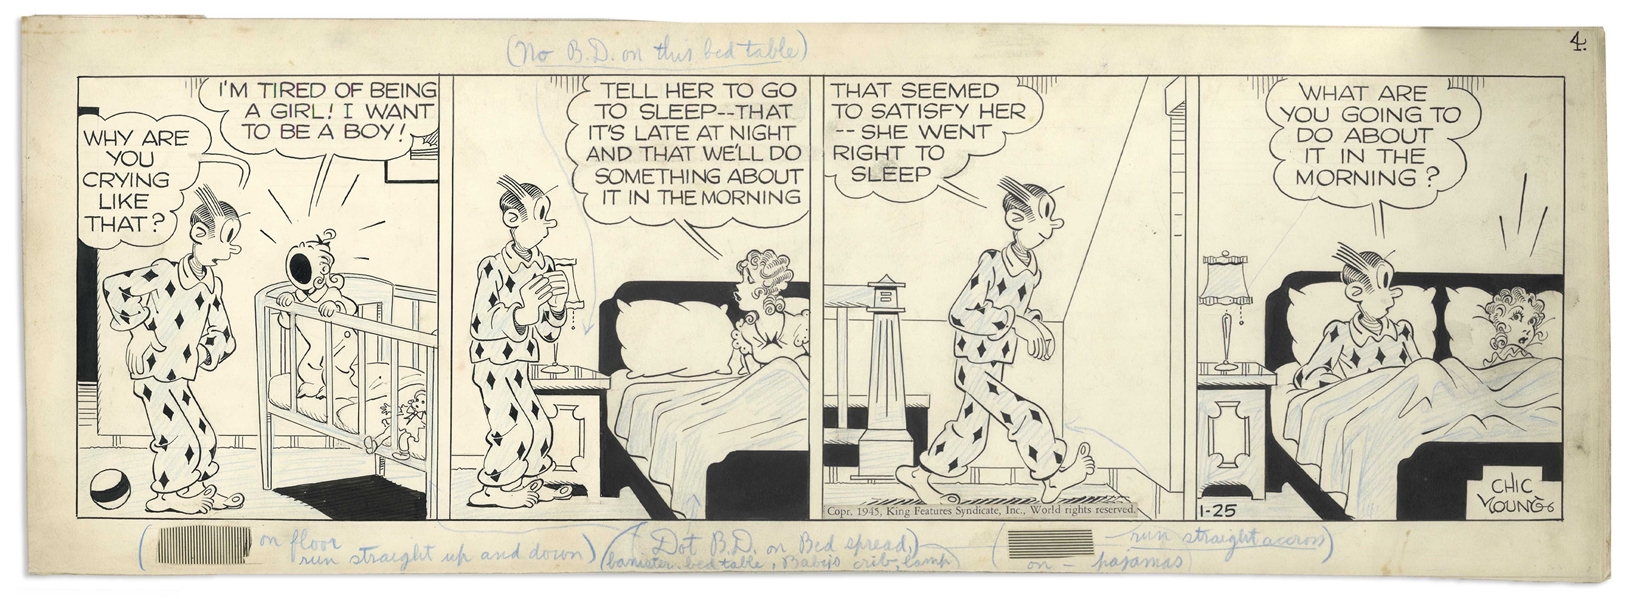 Chic Young Hand-Drawn ''Blondie'' Comic Strip From 1945 Titled ''Give Her a Shave and a Haircut!'' -- Cookie Is Tired of Being a Girl